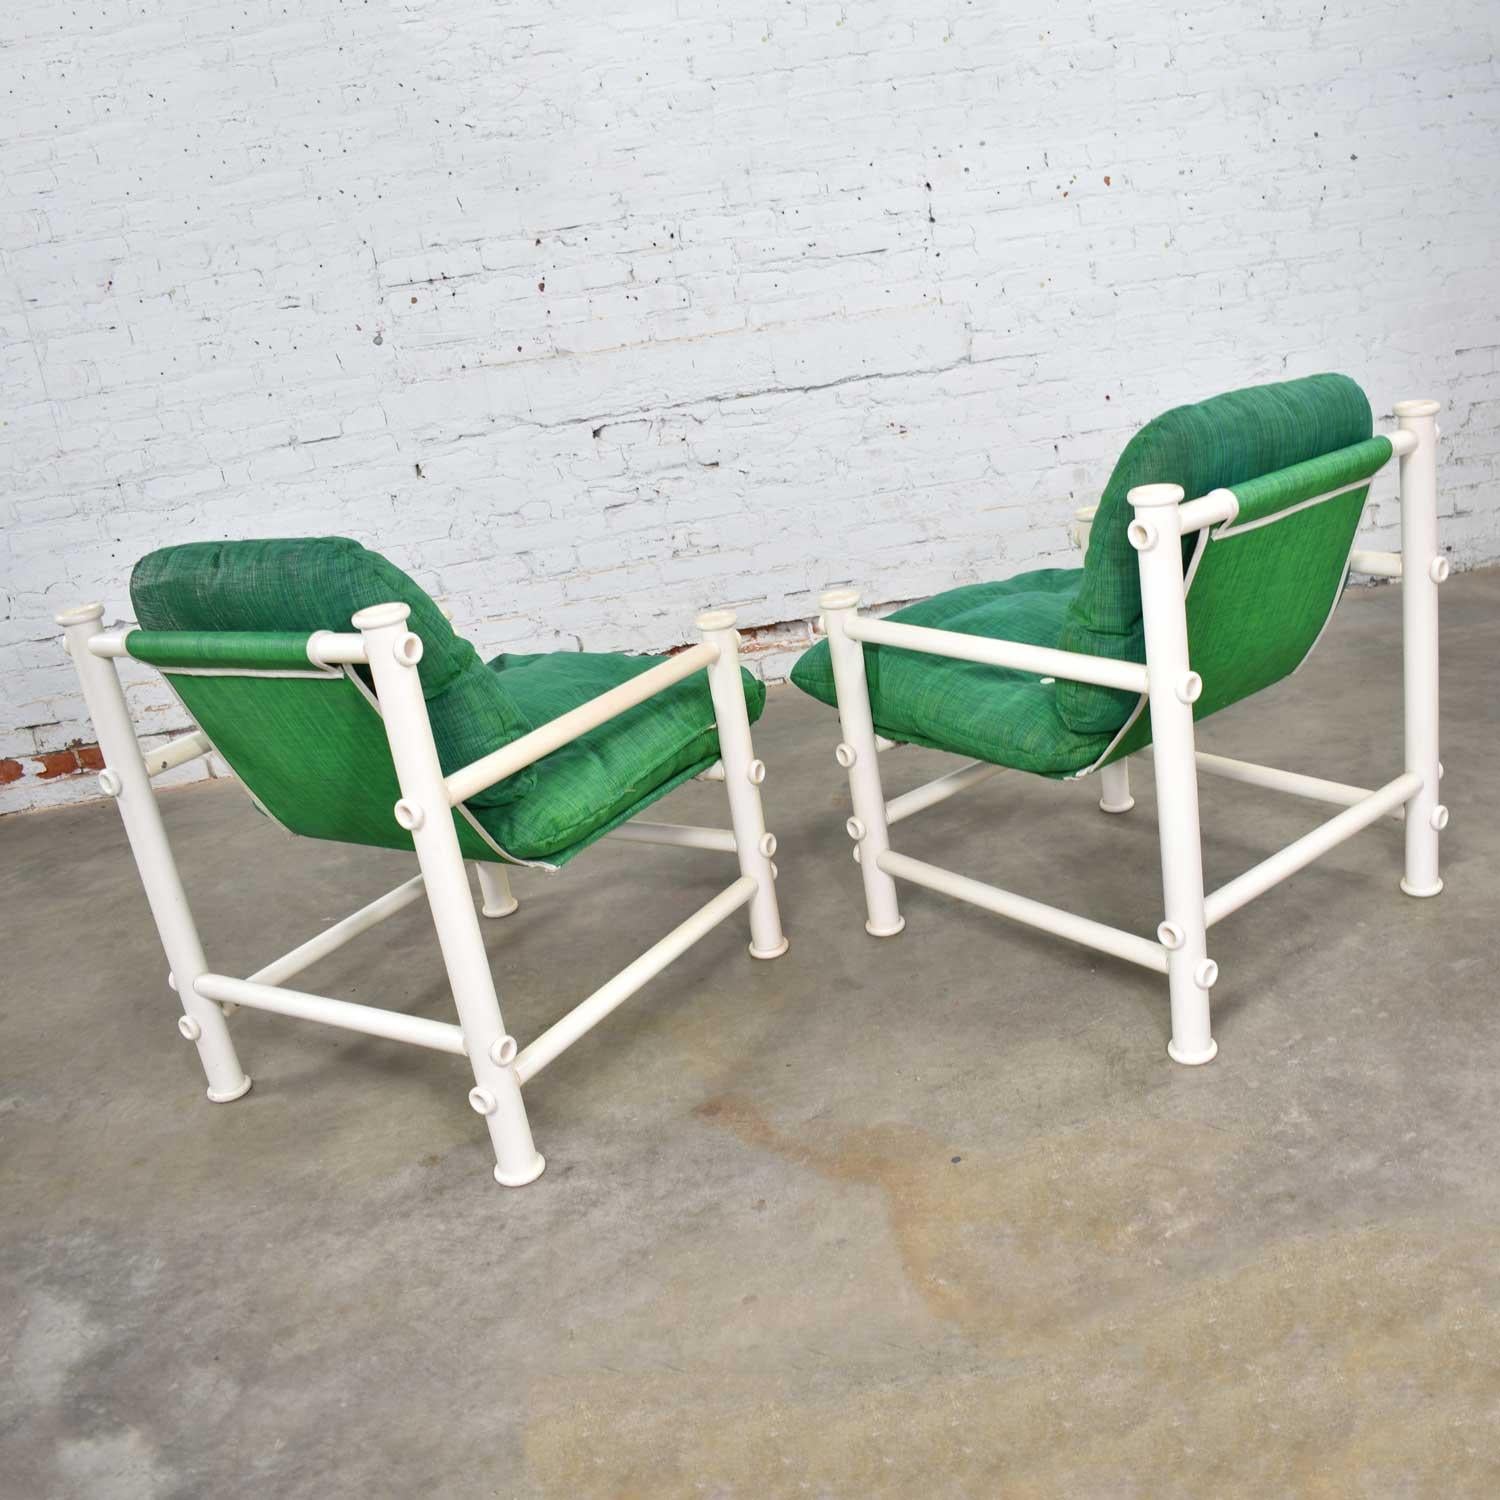 Mid-Century Modern 2 Jerry Johnson Landes PVC Outdoor Idyllwild Lounge Chairs Green Mesh Upholstery For Sale